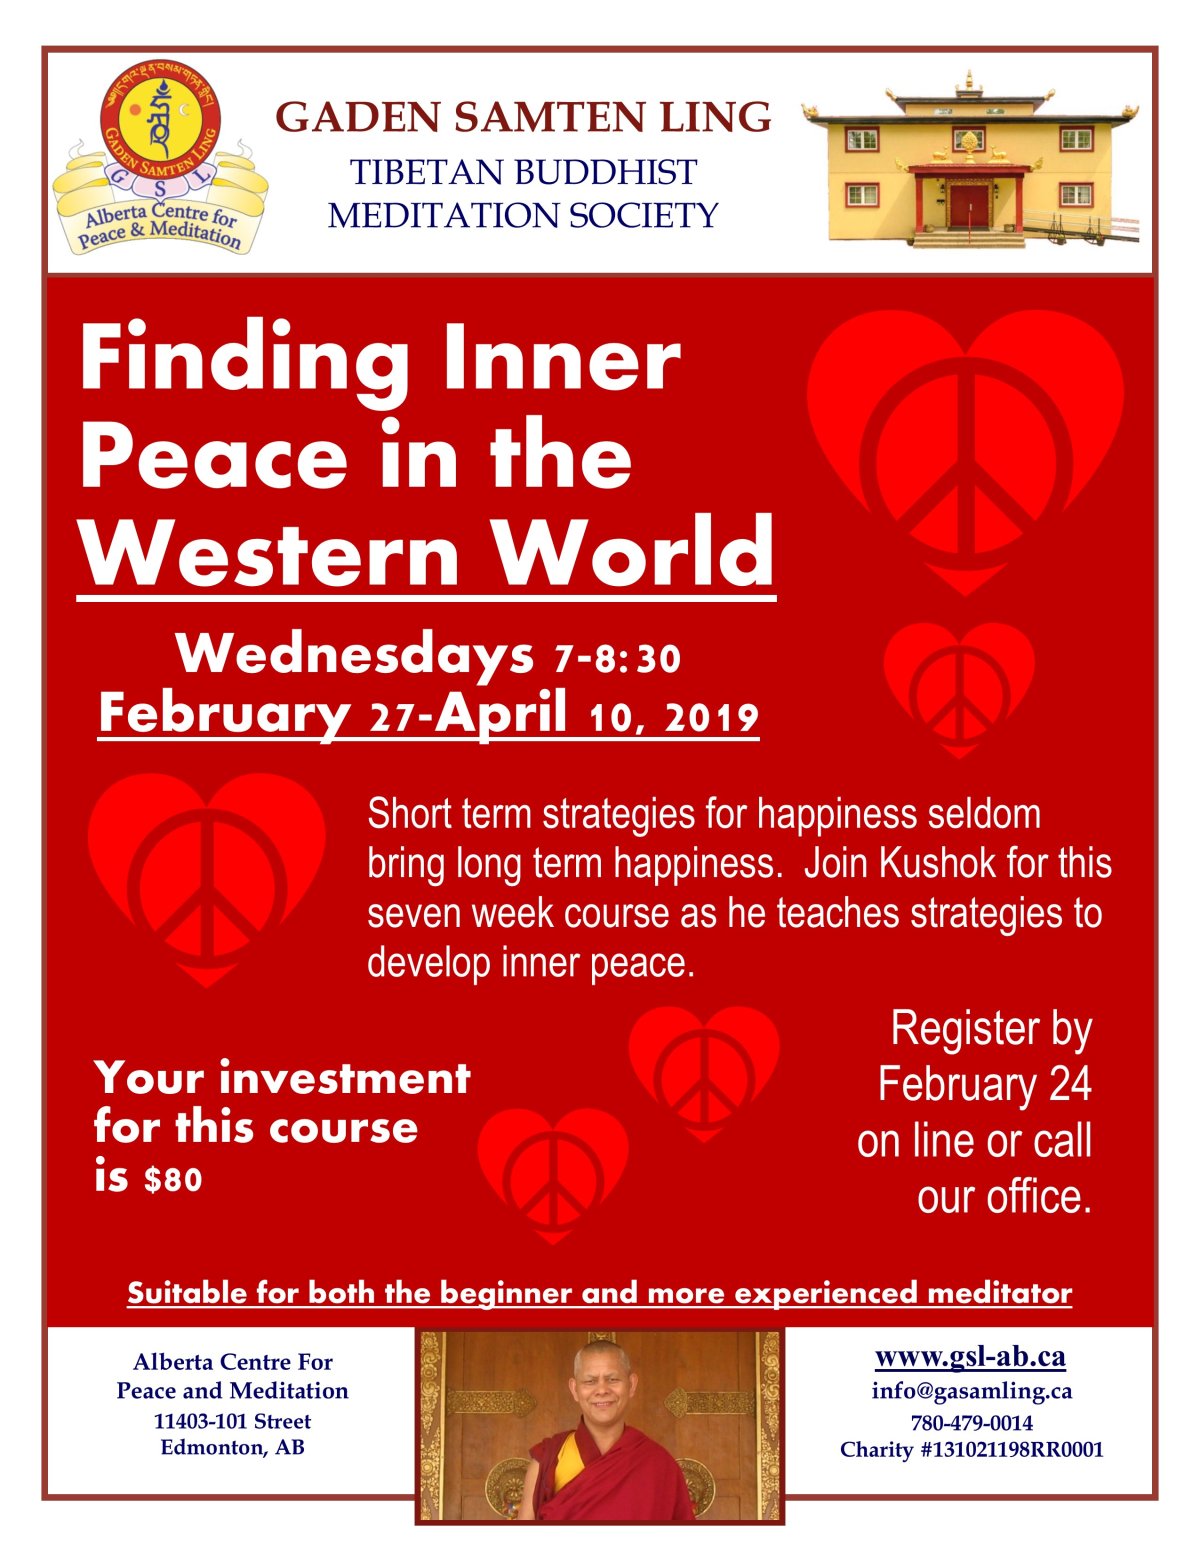 Finding Inner Peace in the Western World - image